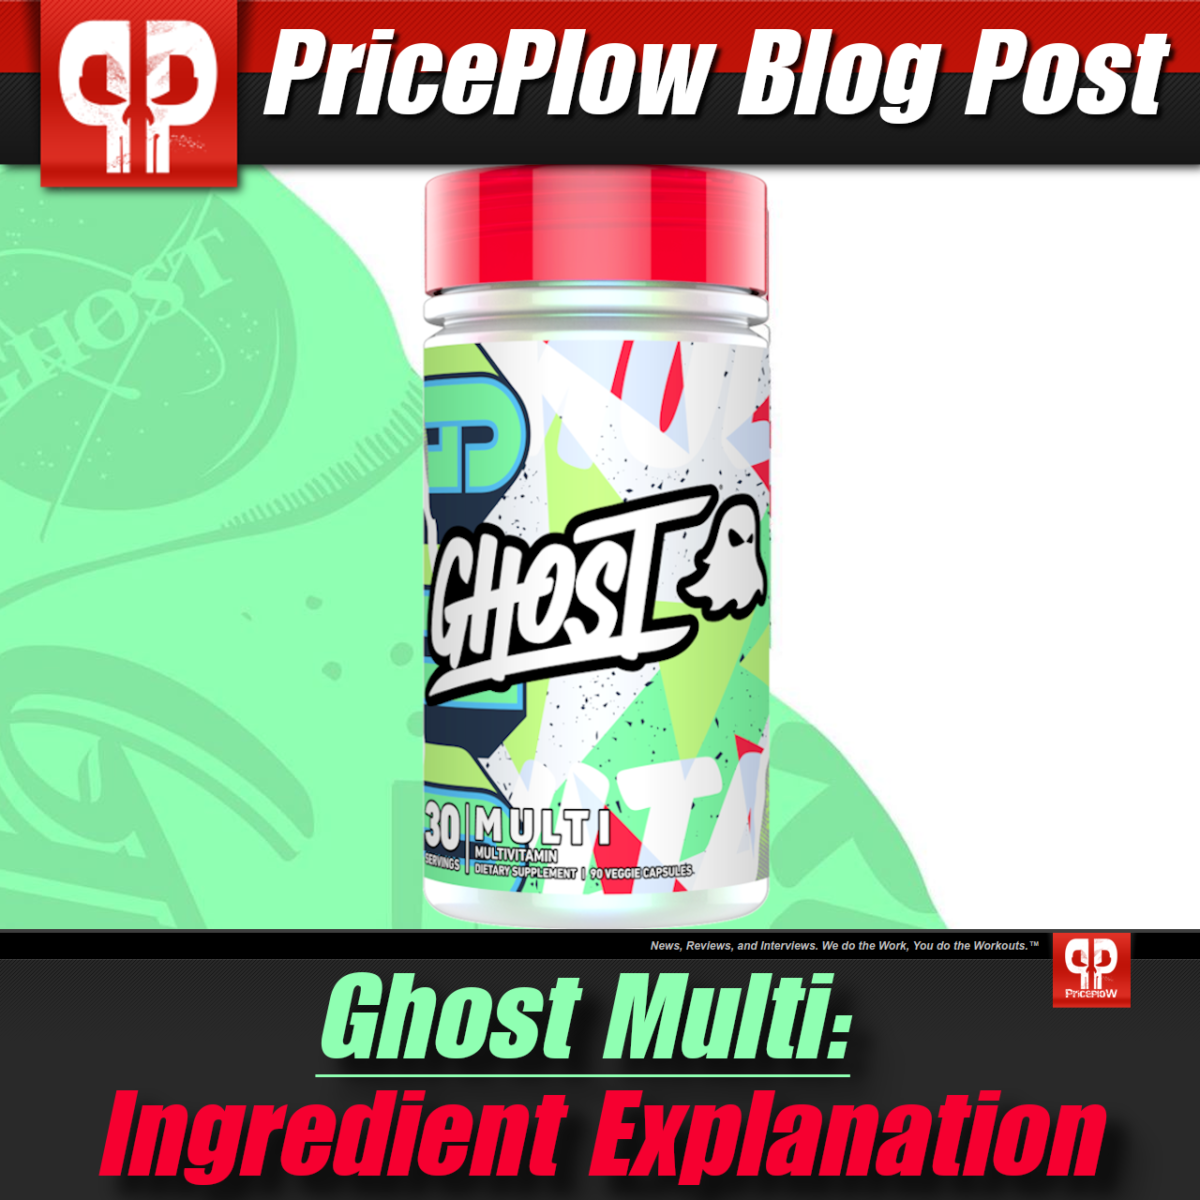 https://blog.priceplow.com/wp-content/uploads/ghost-multi-priceplow-blog-1200x1200-cropped.png